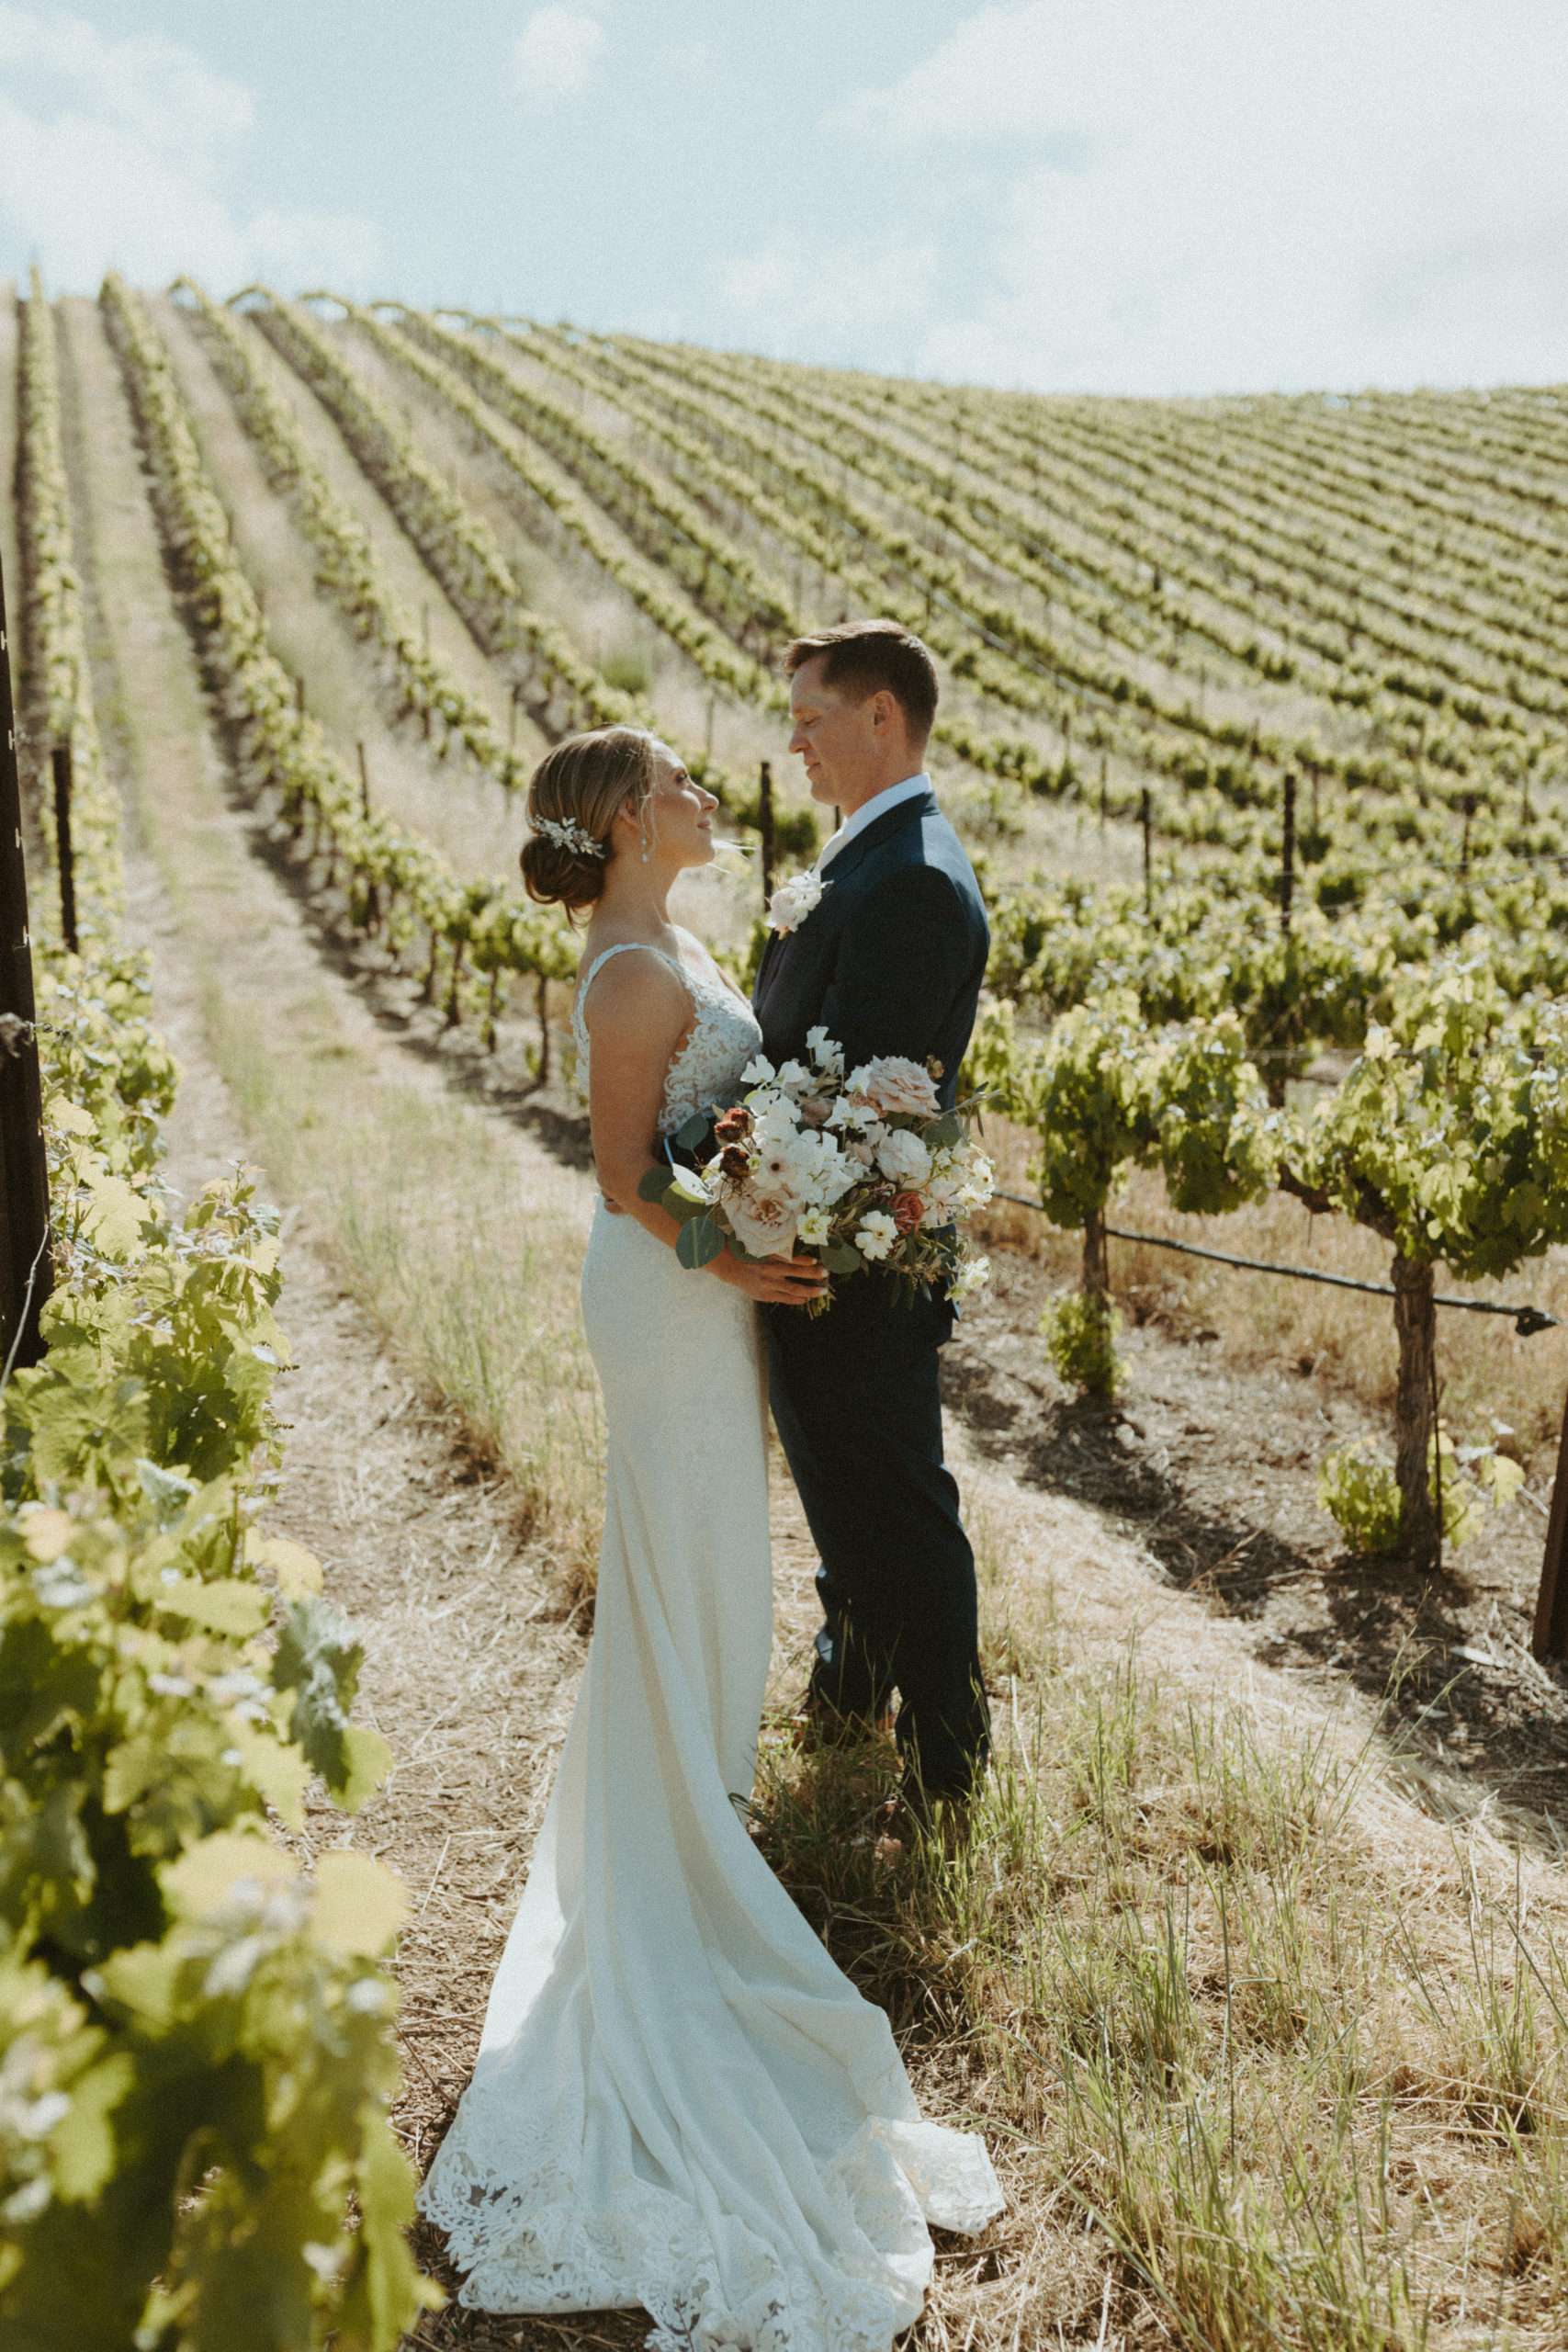 the bride and groom looking at each other in the vineyard